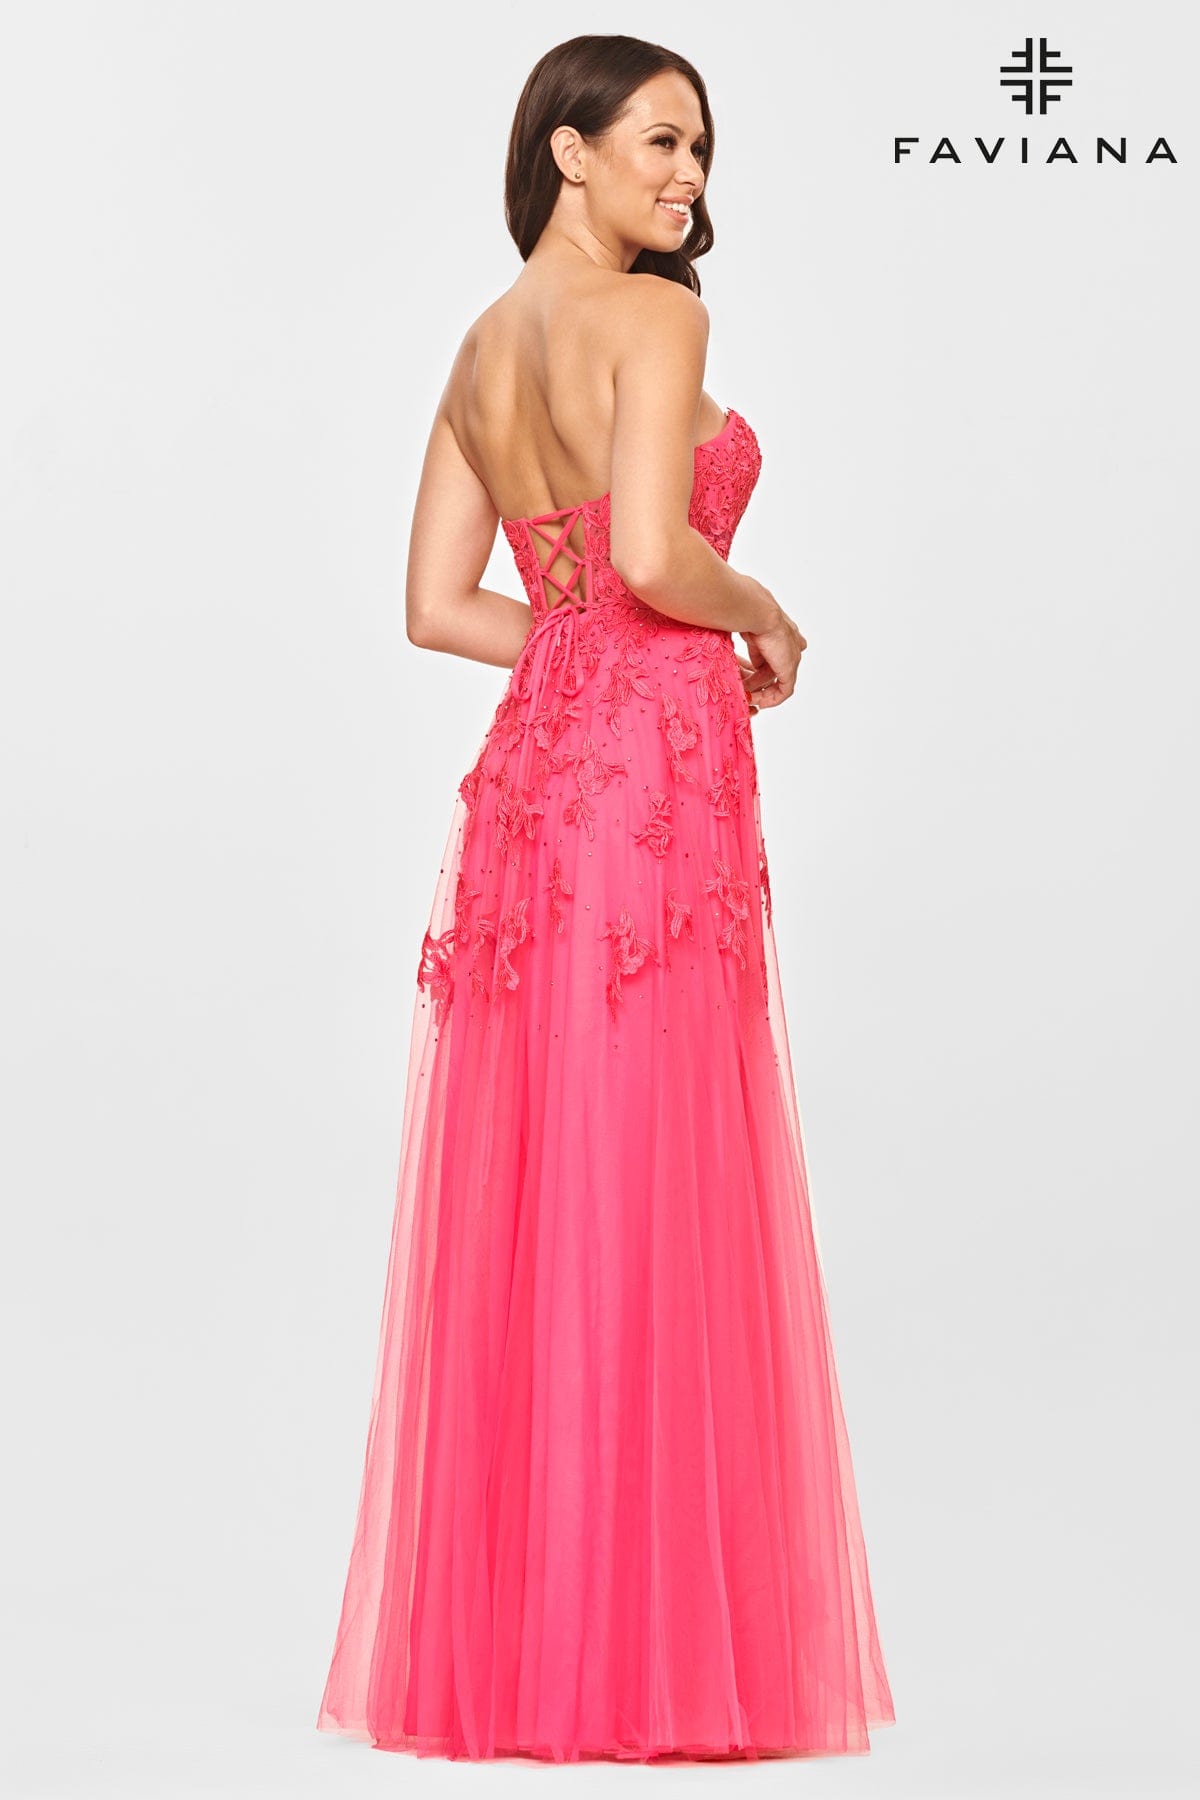 Hot Pink Long Tulle Prom Dress With Corset Bodice And Lace Applique